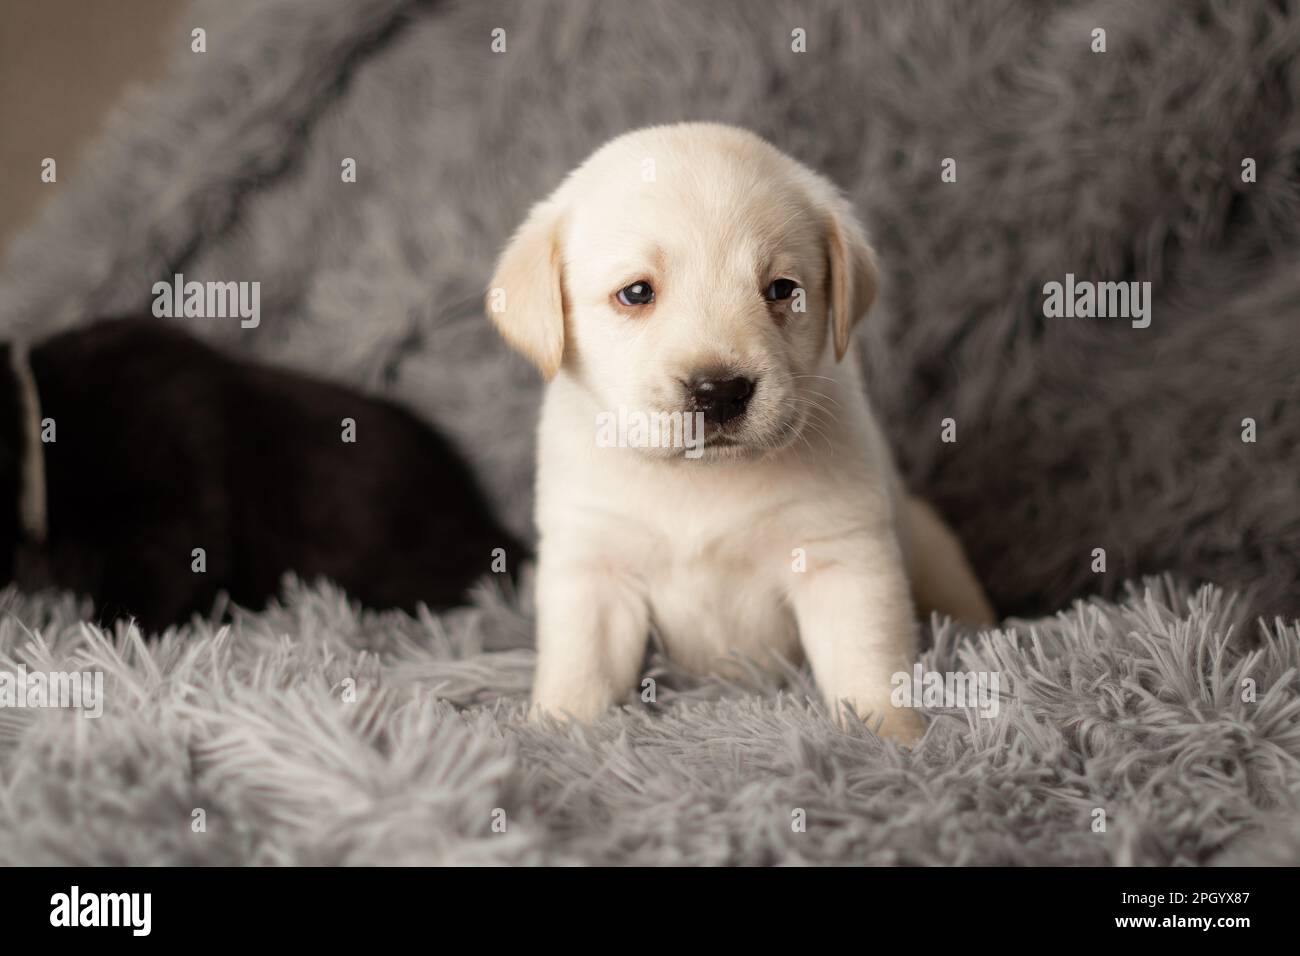 Labrador puppies sitting on a gray blanket, studio photo of dogs Stock Photo